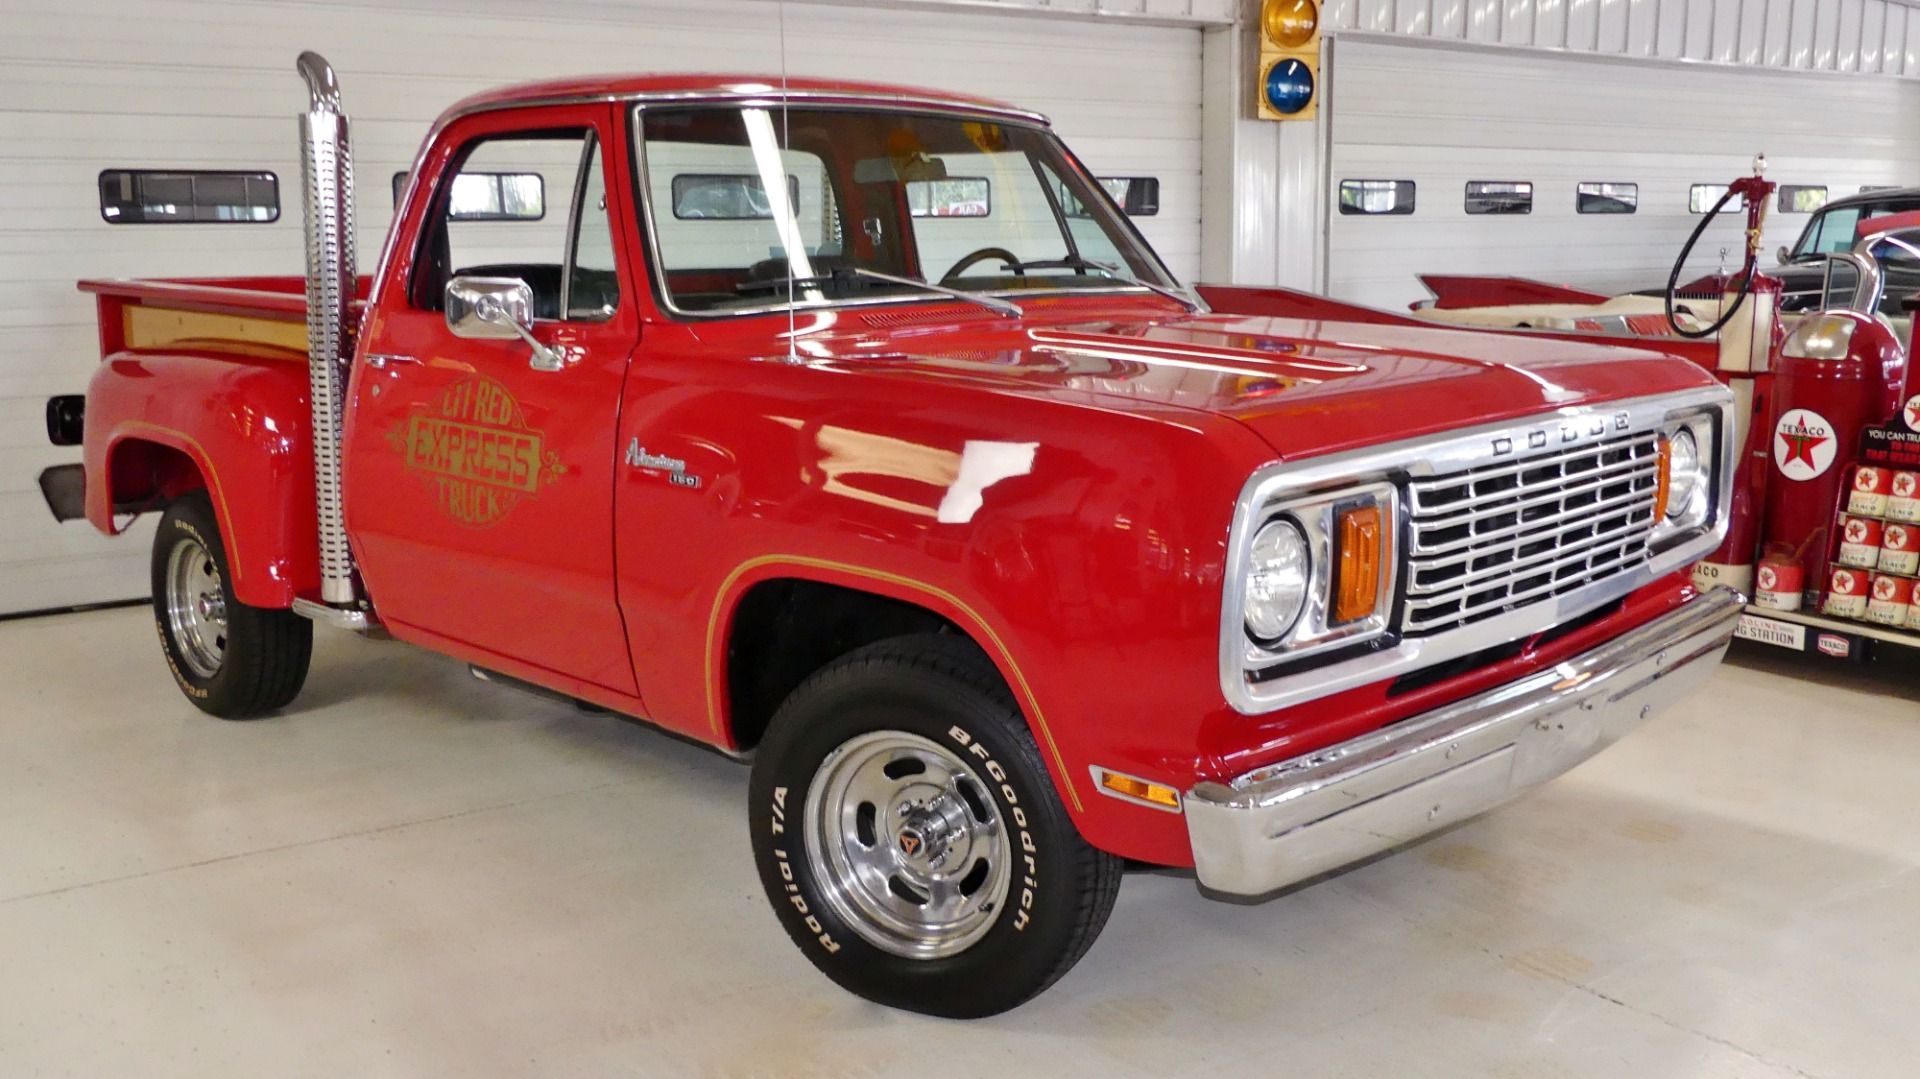 1978 Dodge Lil’ Red Express